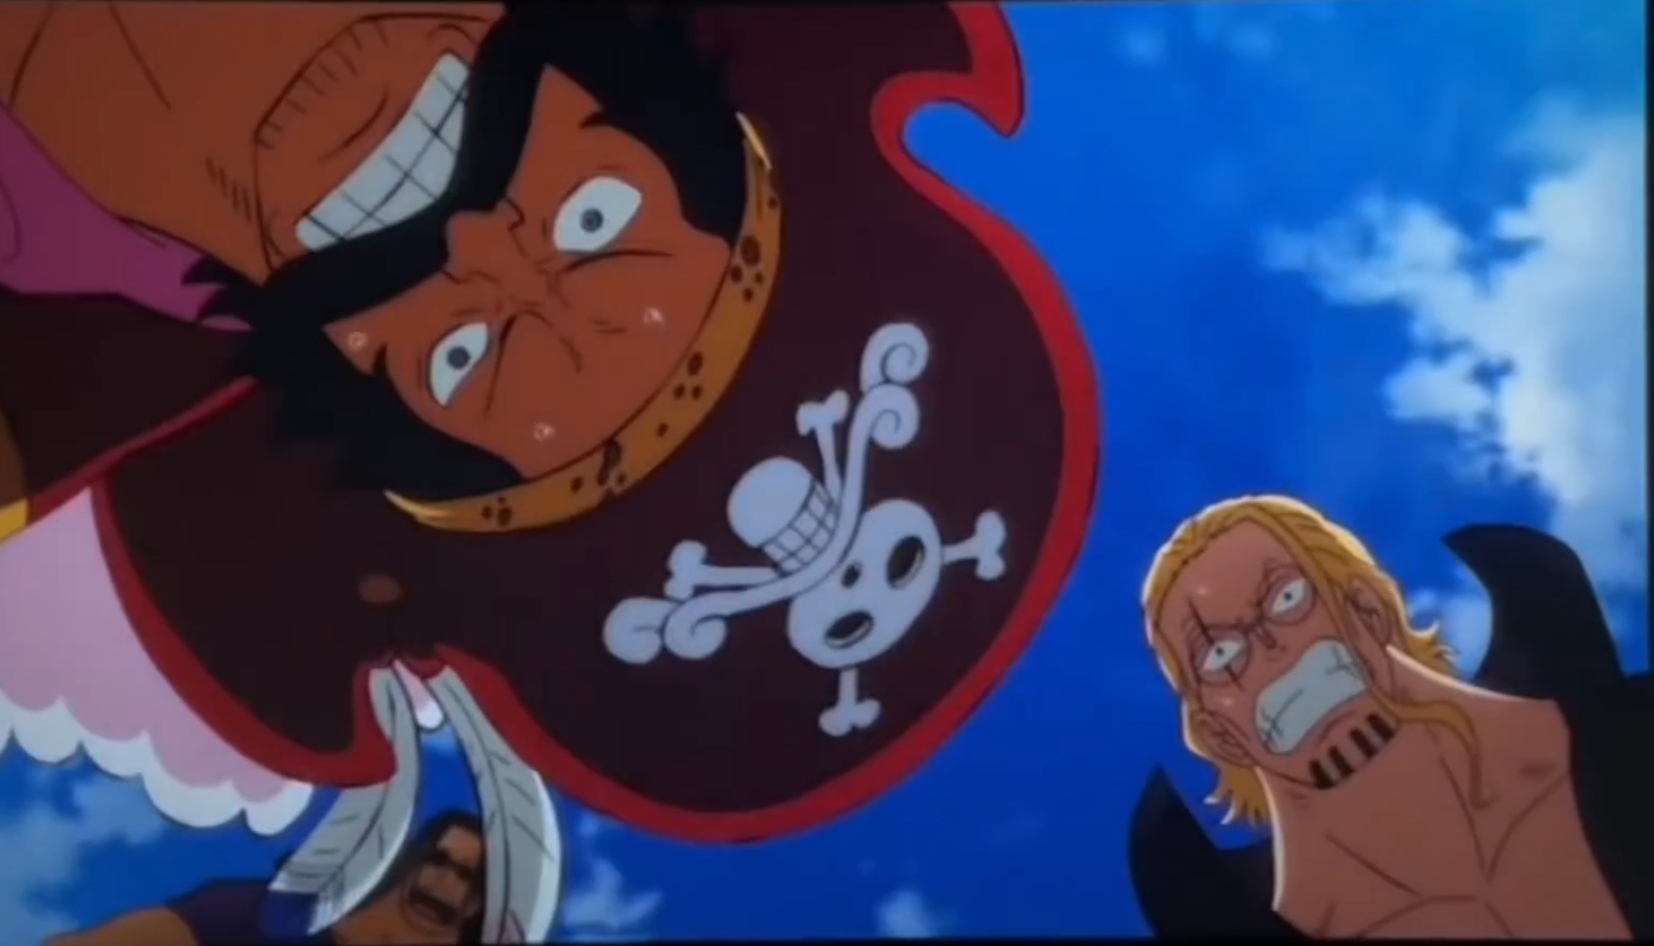 What Were Rocks And Roger Doing On God Valley In One Piece #1096